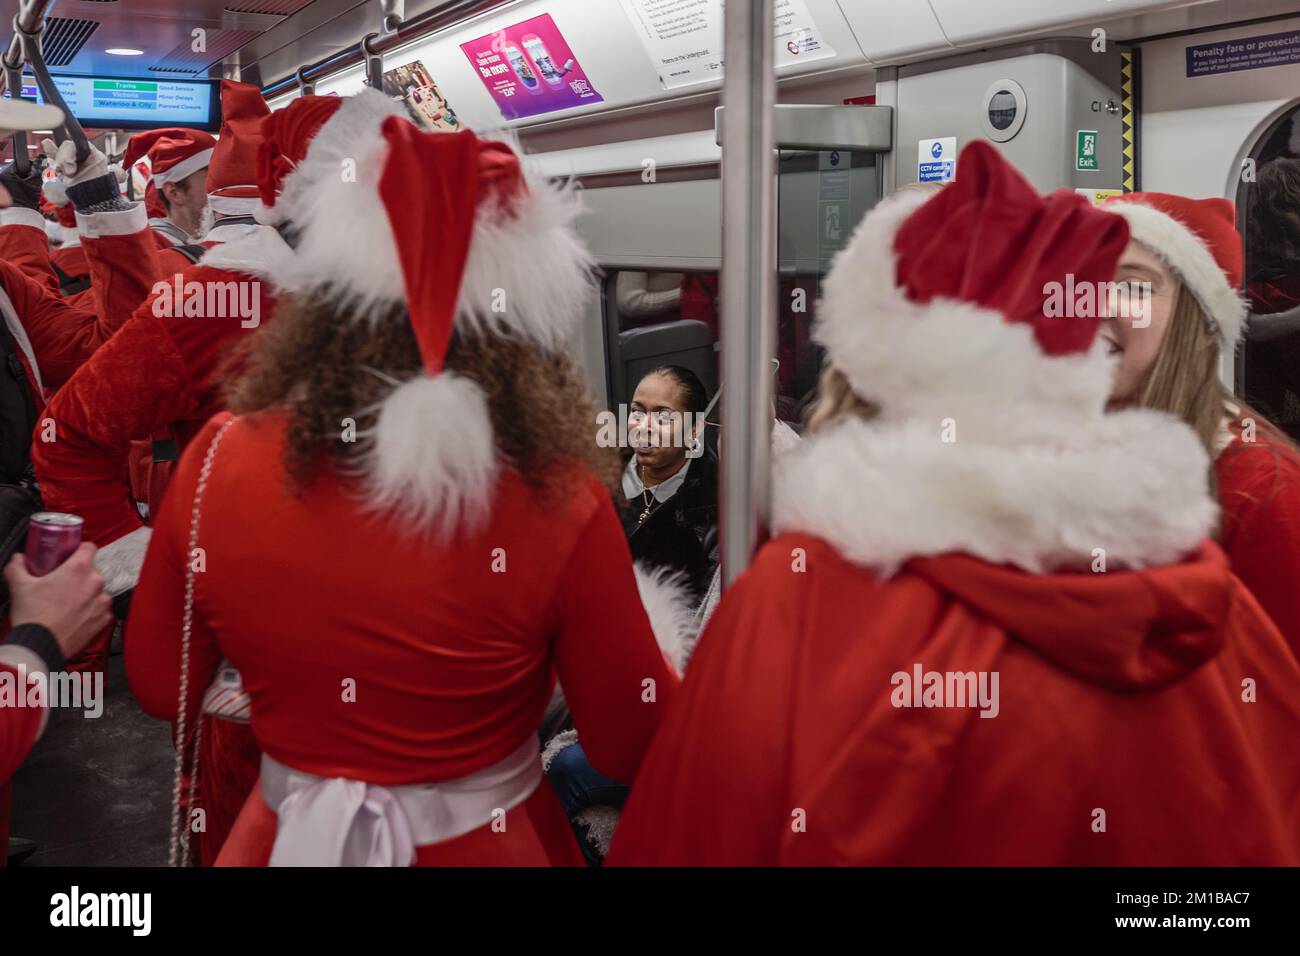 A member of the public reacts to the invasion of santas on the tube in London. Stock Photo